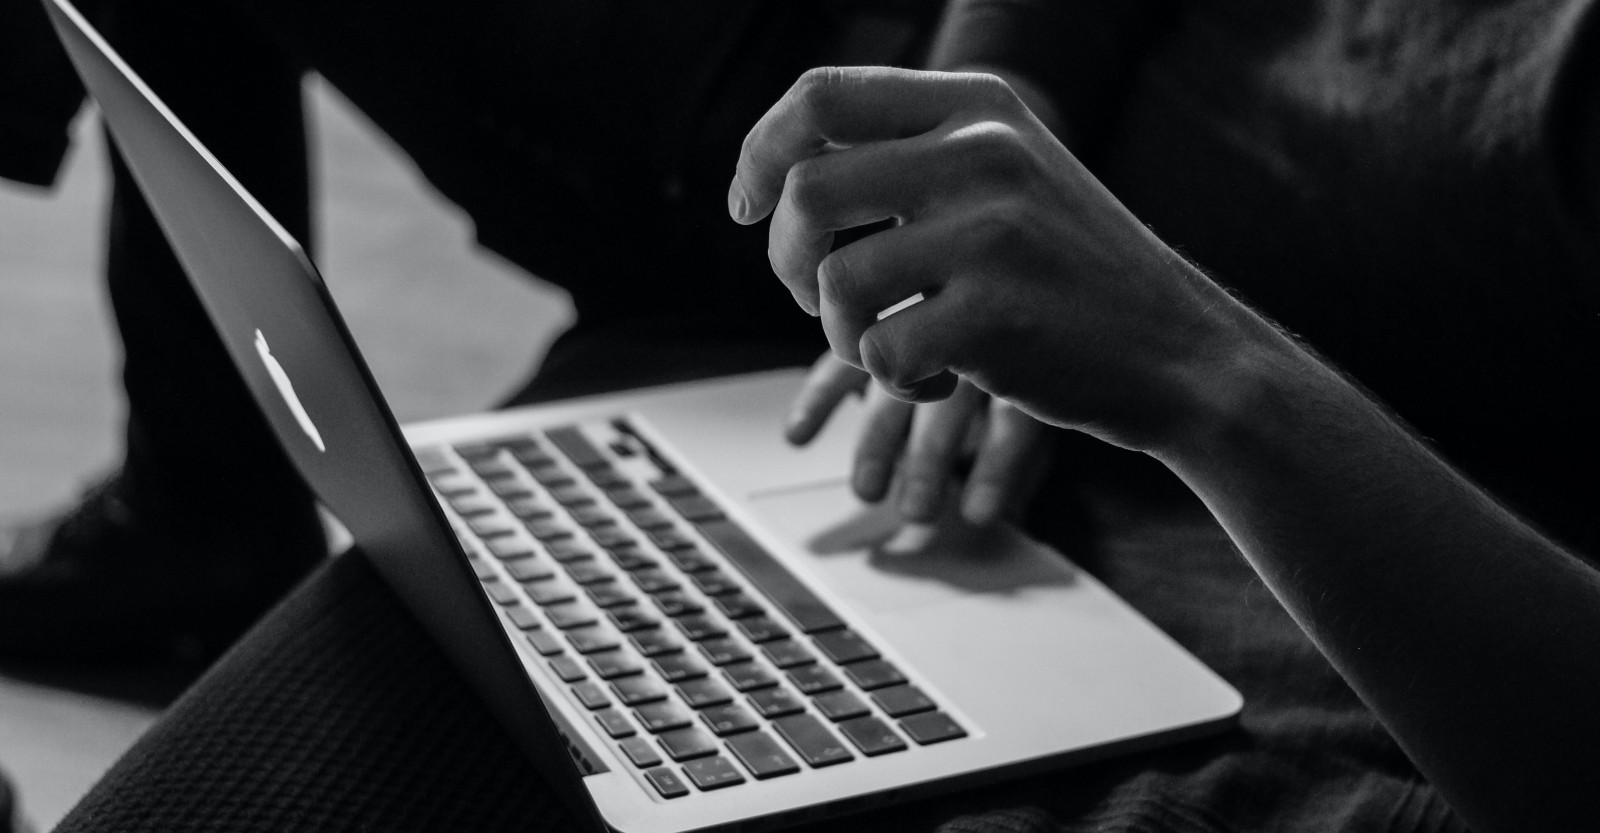 A person using a laptop in black and white